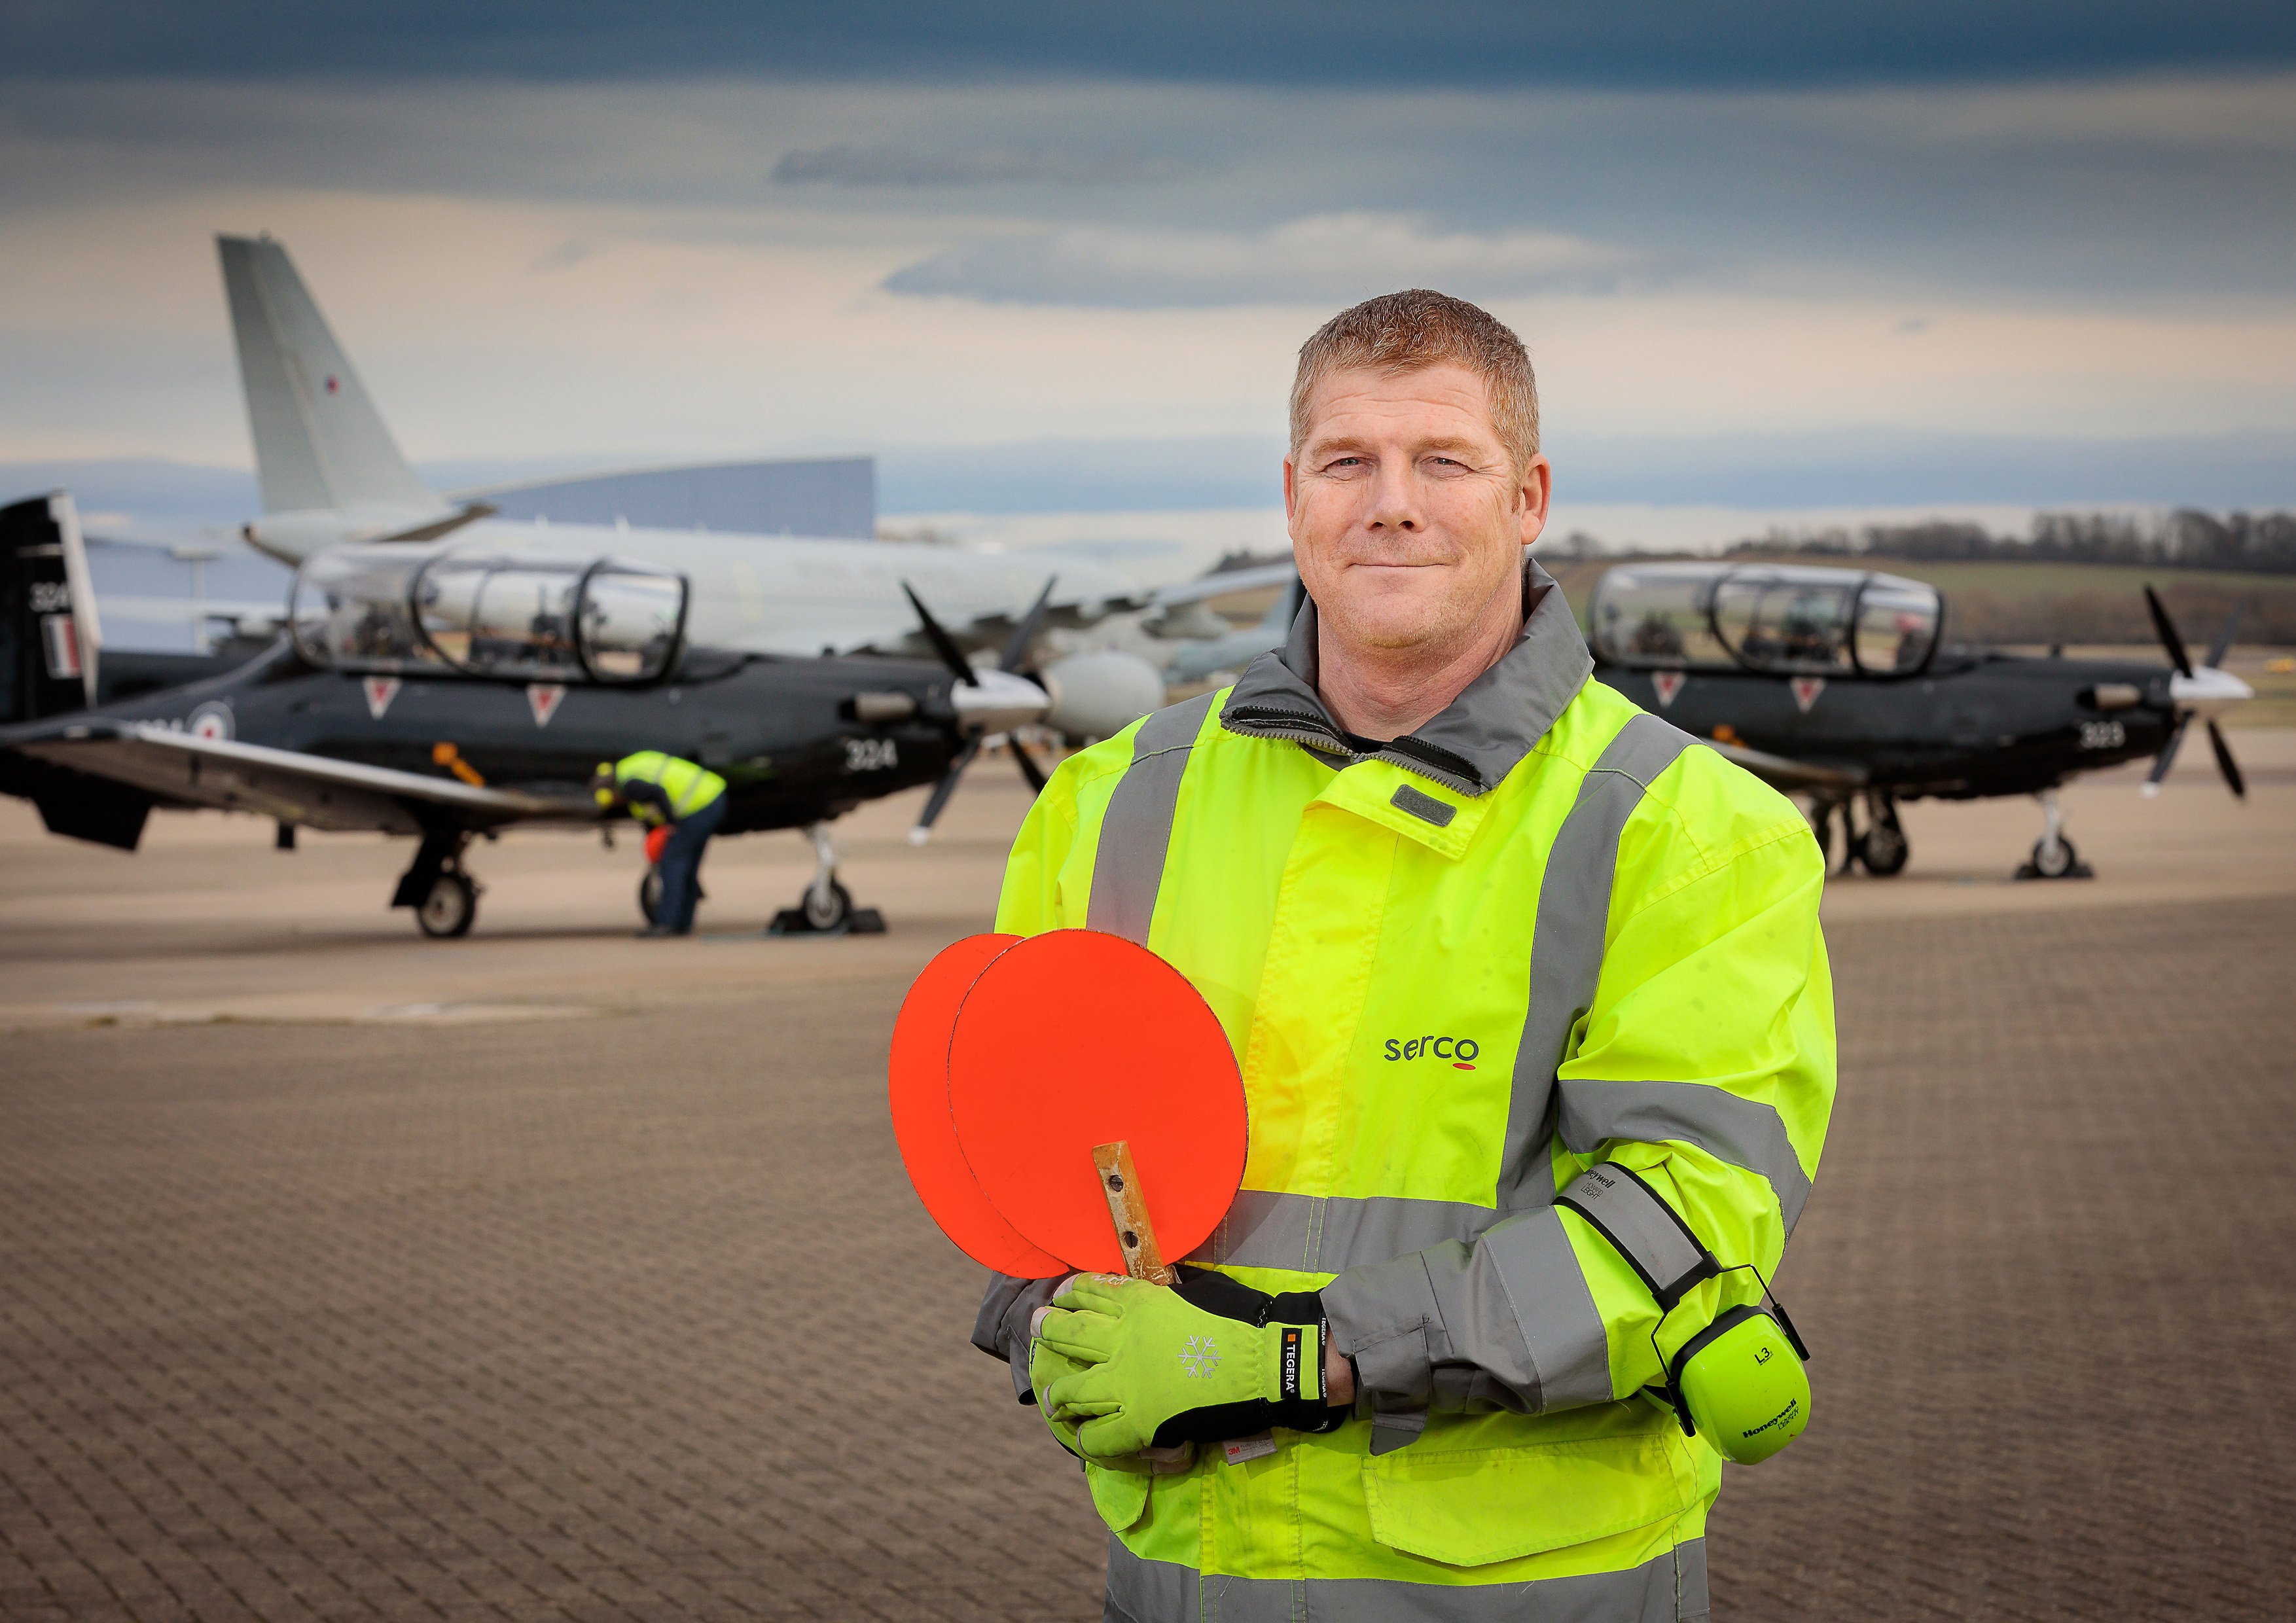 Paul is completing an Aviation Ground Operative Apprenticeship Standard Level 2